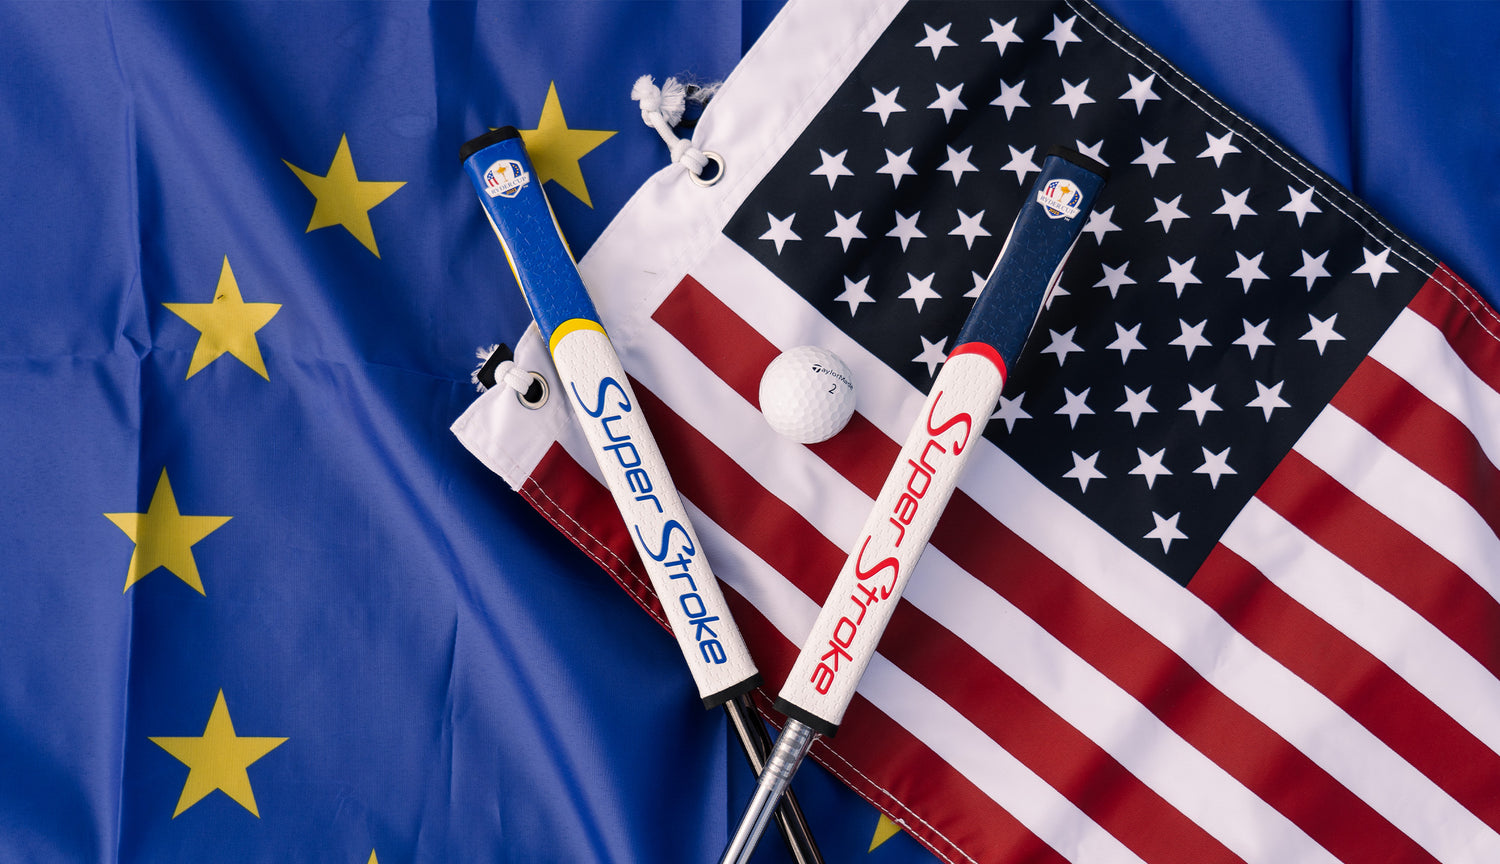 SUPERSTROKE RELEASES LIMITED-EDITION OFFICIAL RYDER CUP PUTTER GRIPS